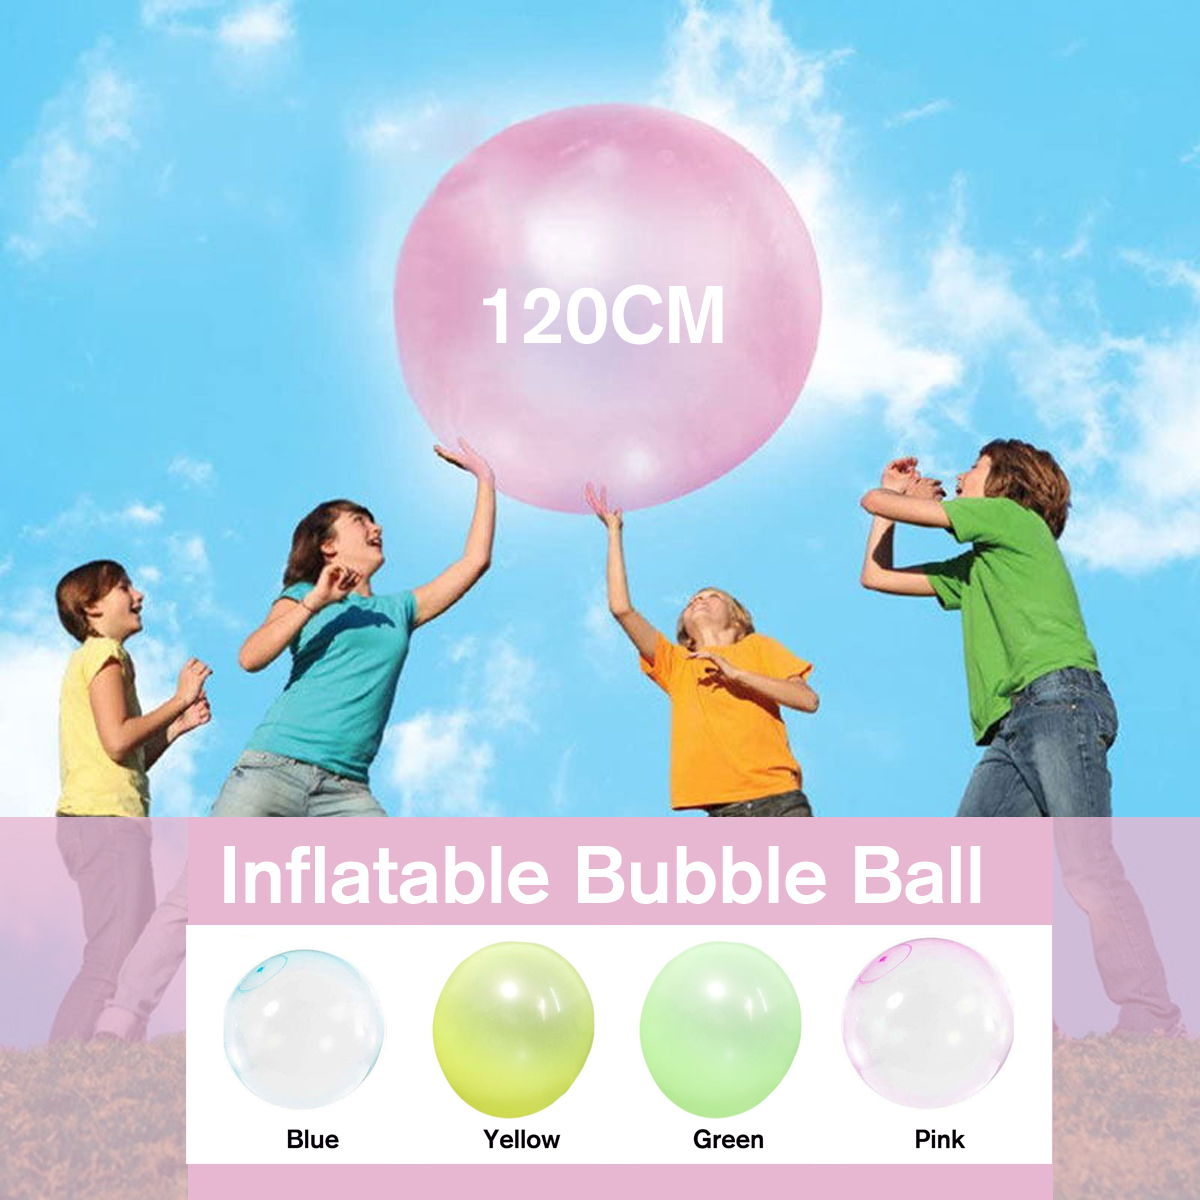 120CM-Multi-color-Bubble-Ball-Inflatable-Filling-Water-Giant-Ball-Toys-for-Kids-Play-Gift-1891654-2